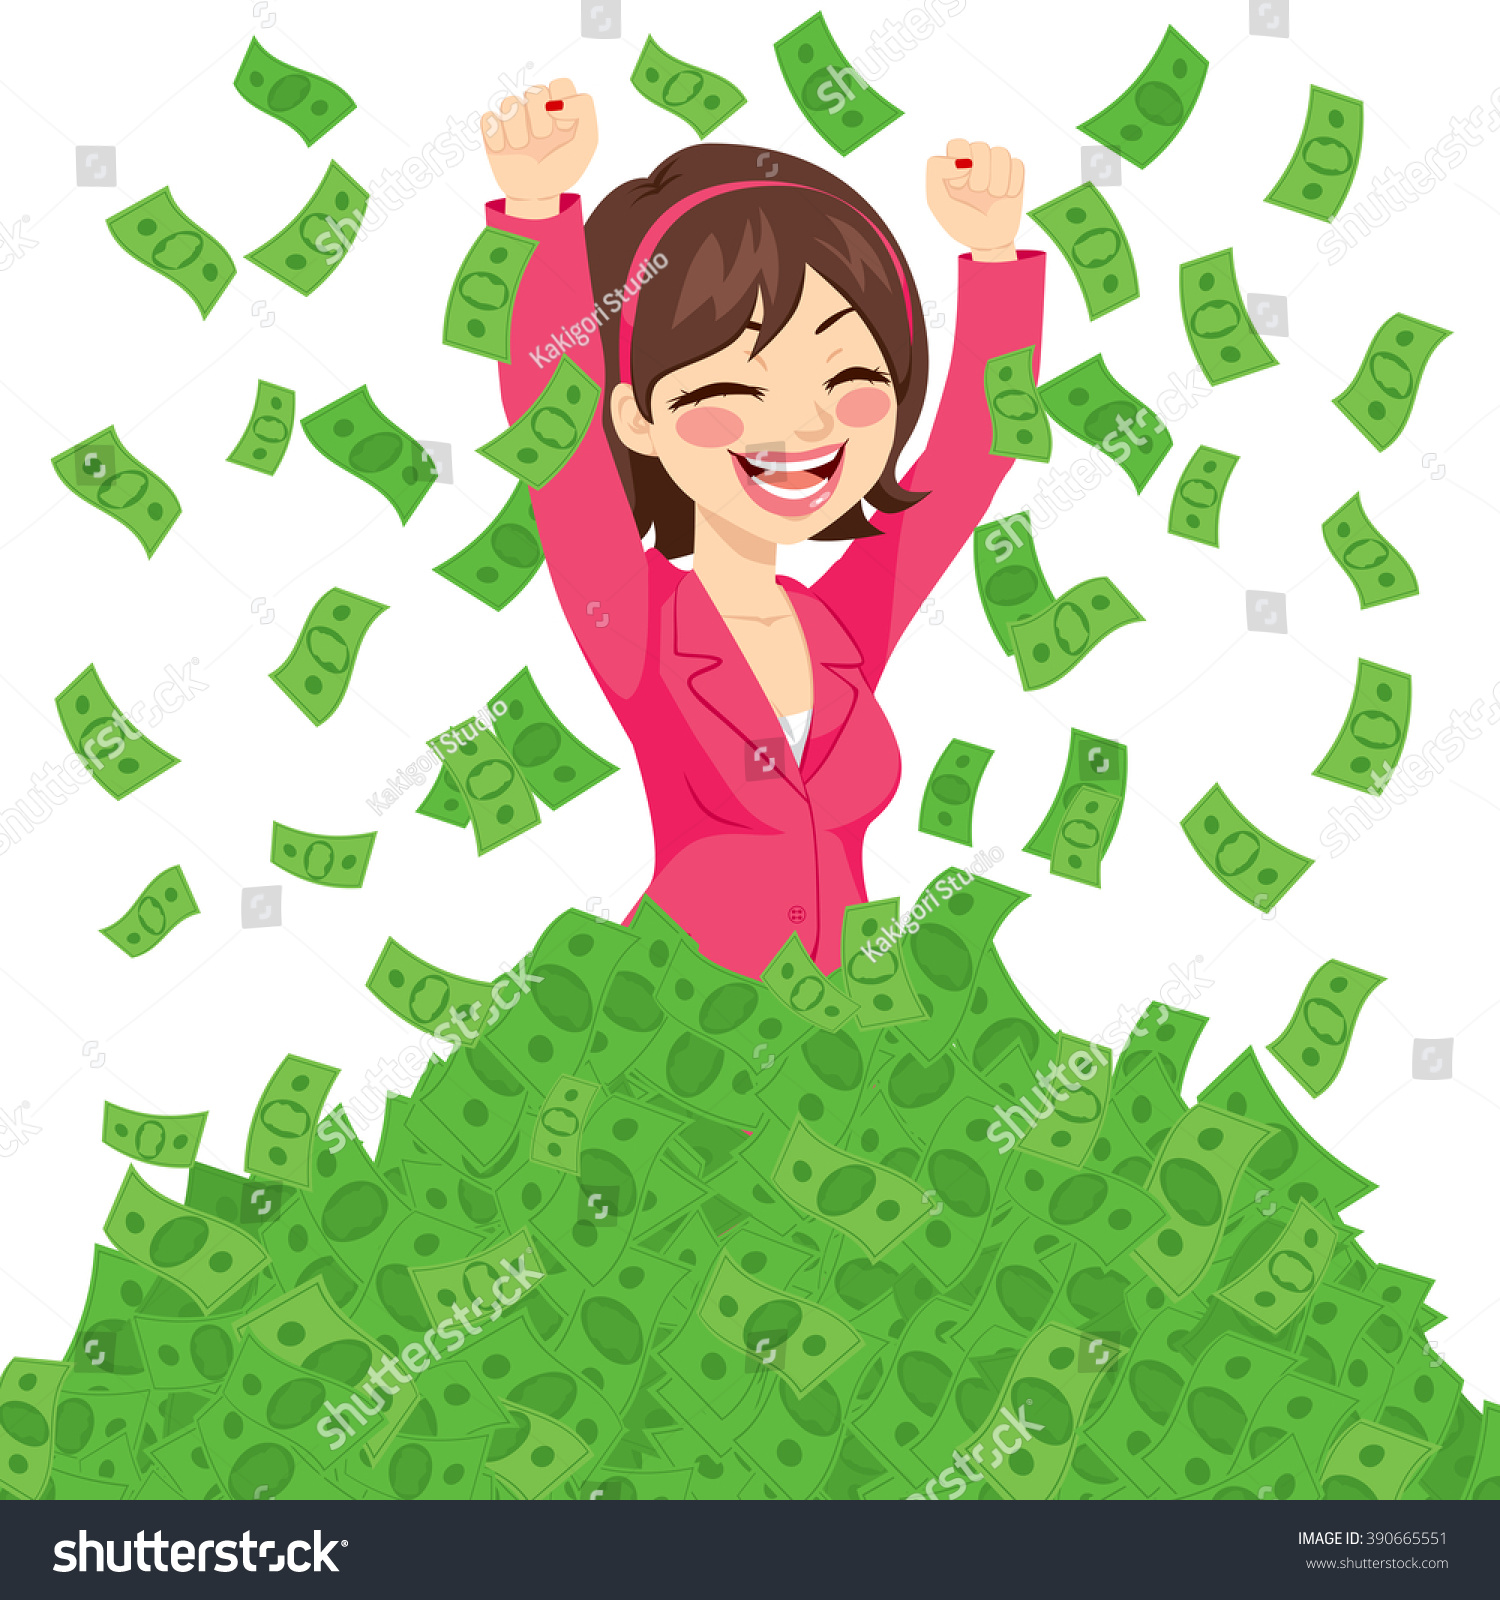 stock-vector-happy-rich-successful-businesswoman-raising-from-huge-pile-of-green-money-banknotes-wearing-pink-390665551.jpg